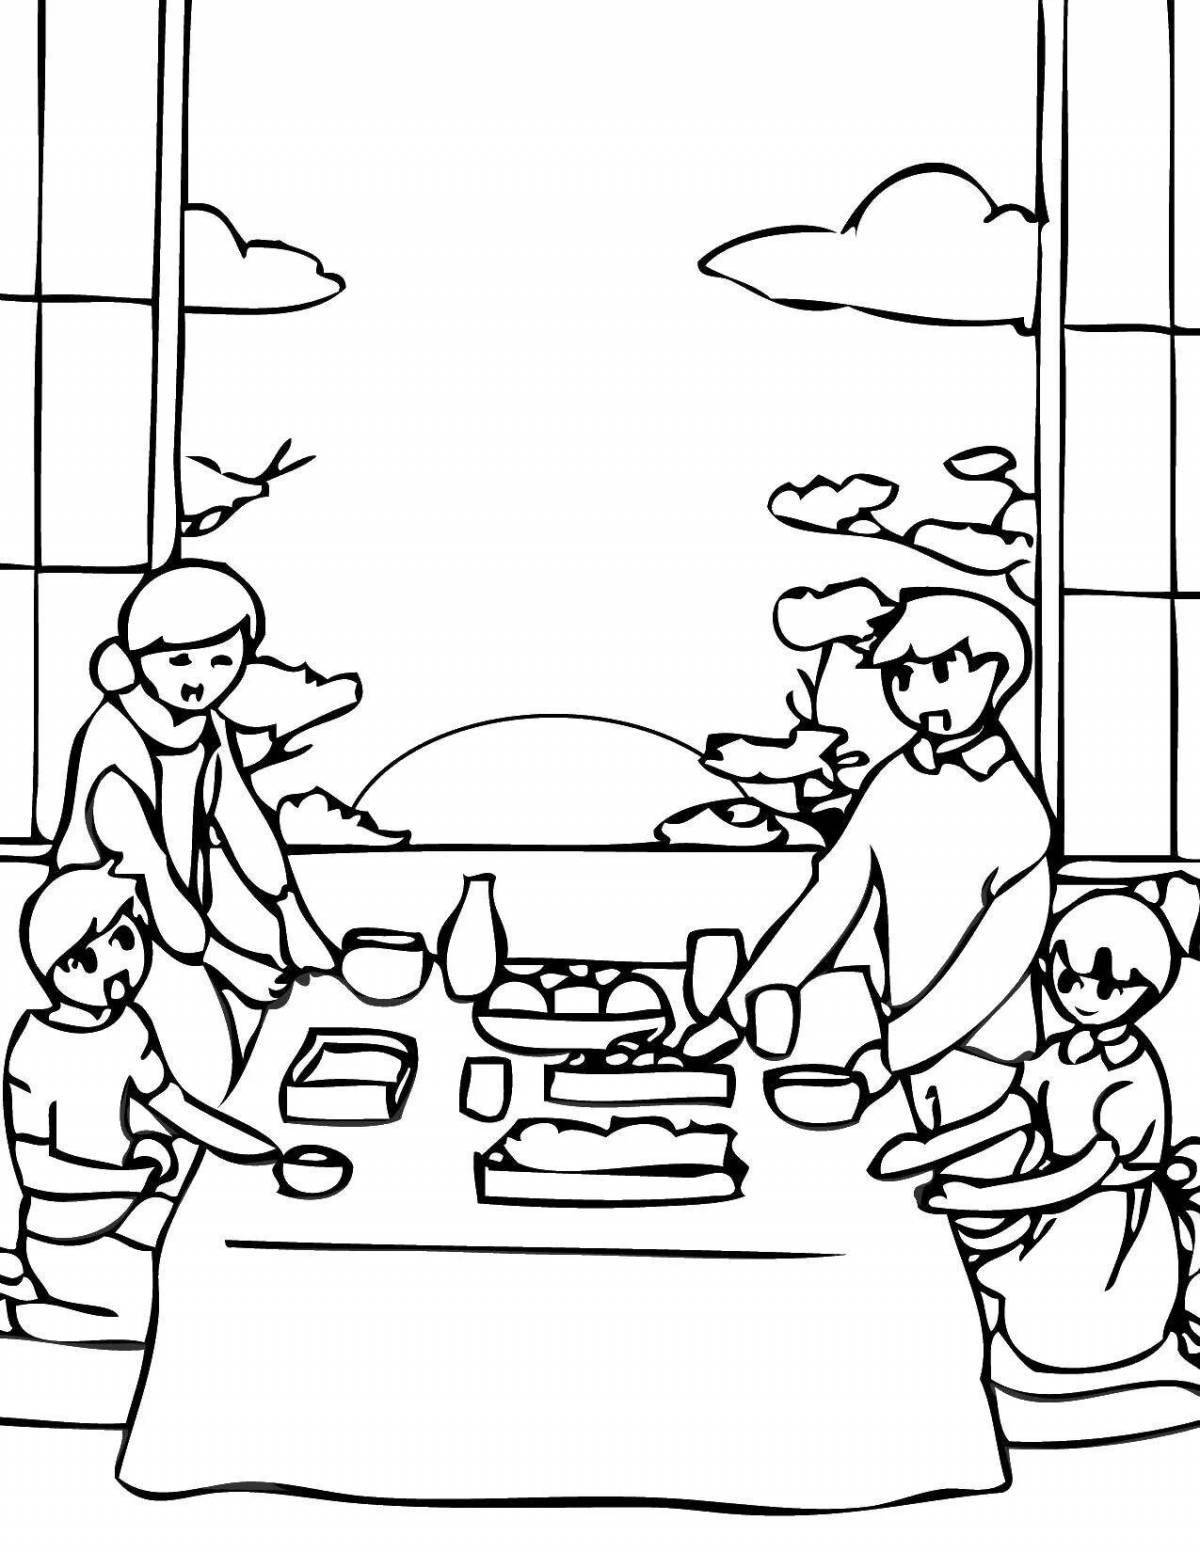 Coloring page serene family at the table